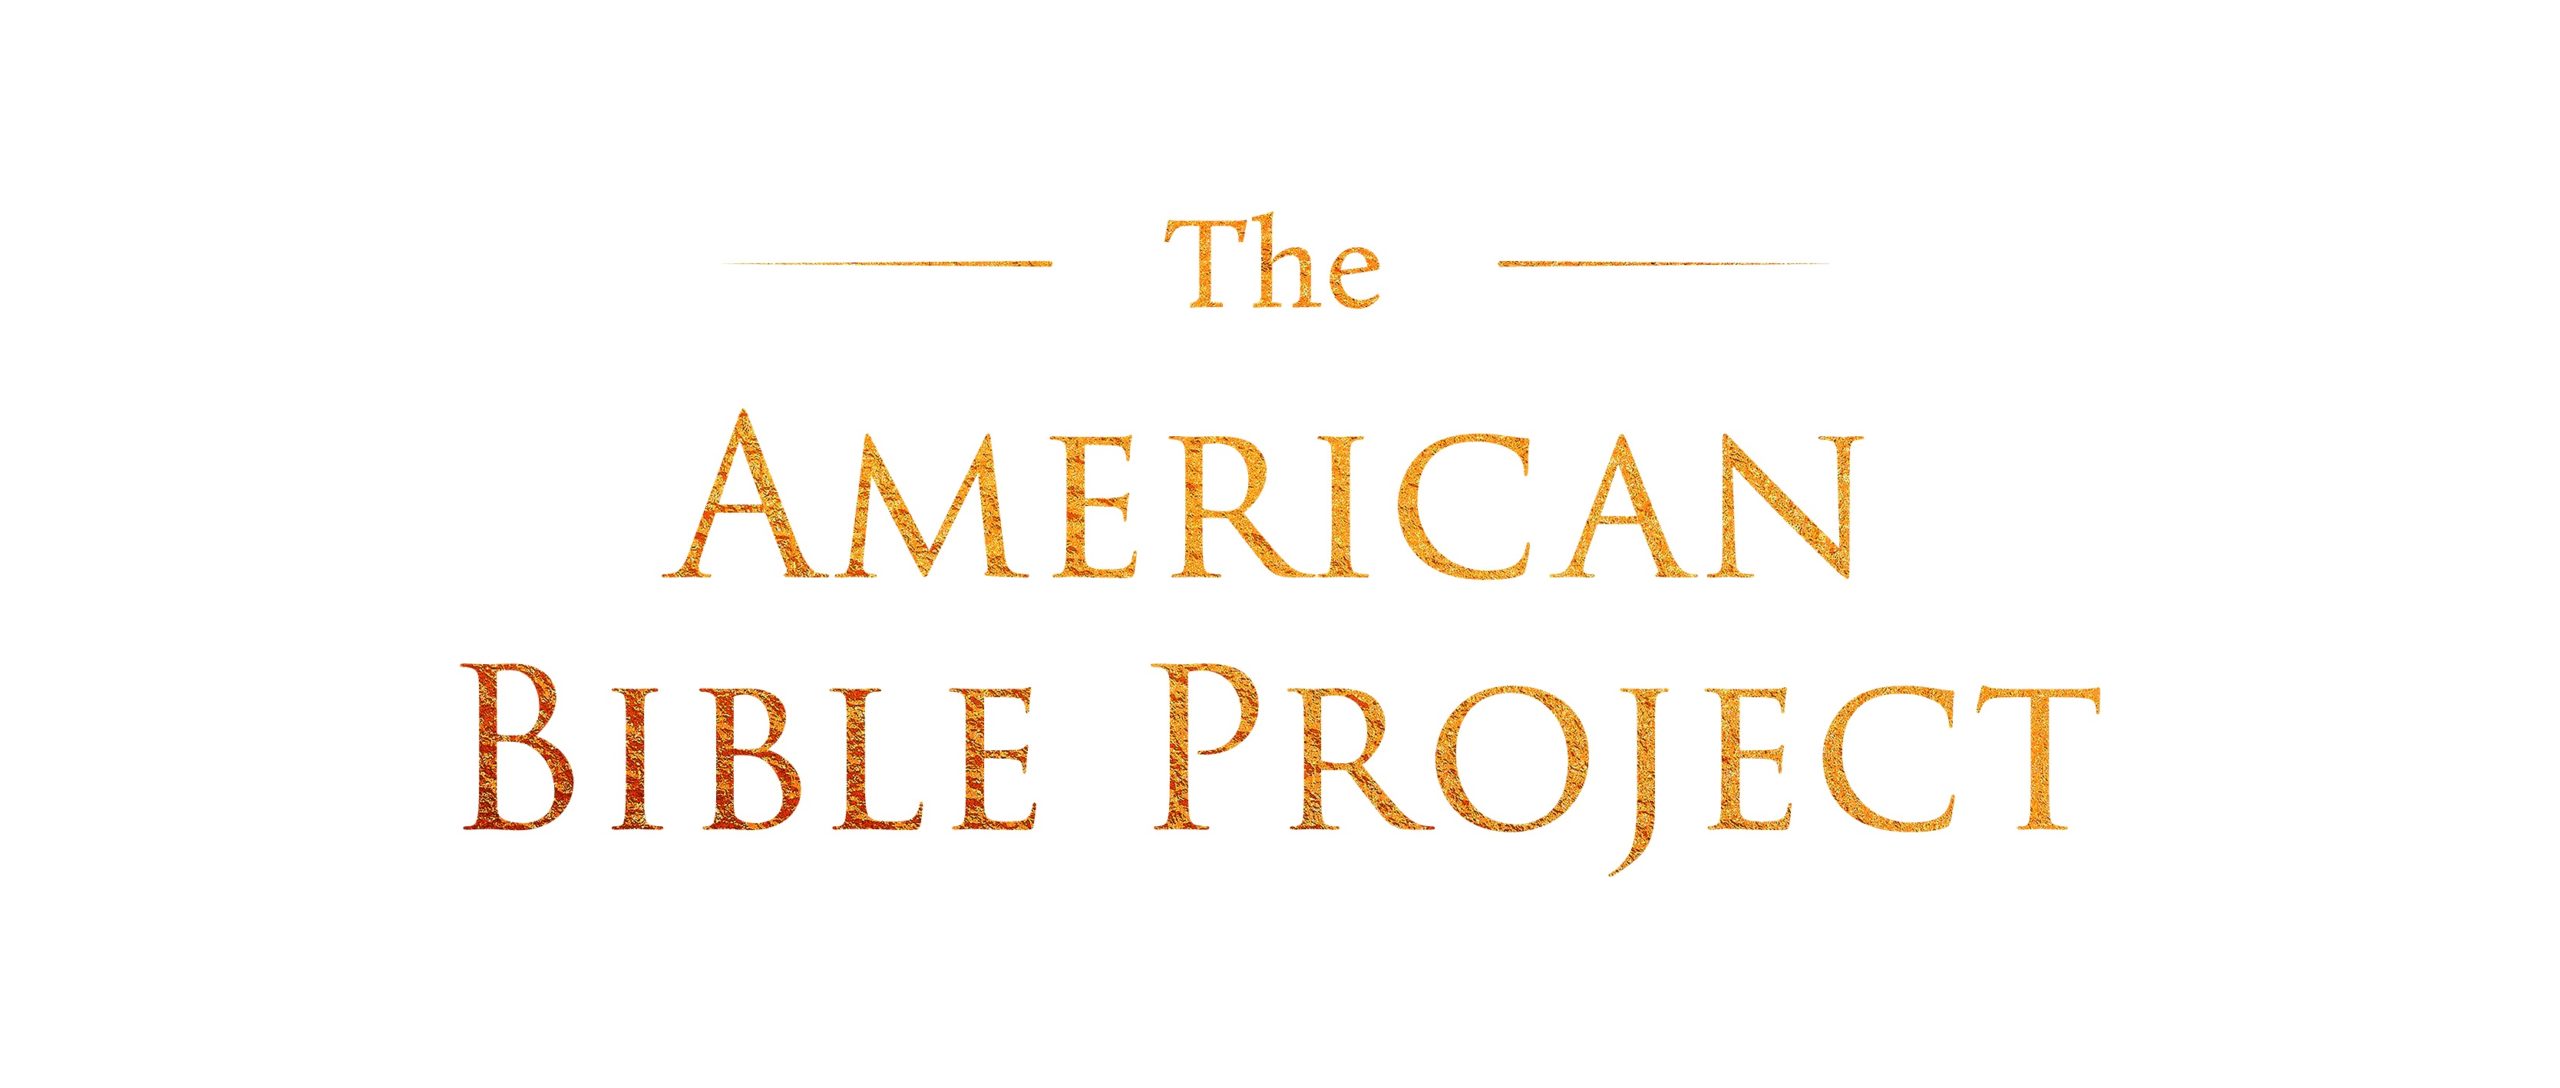 The American Bible Project